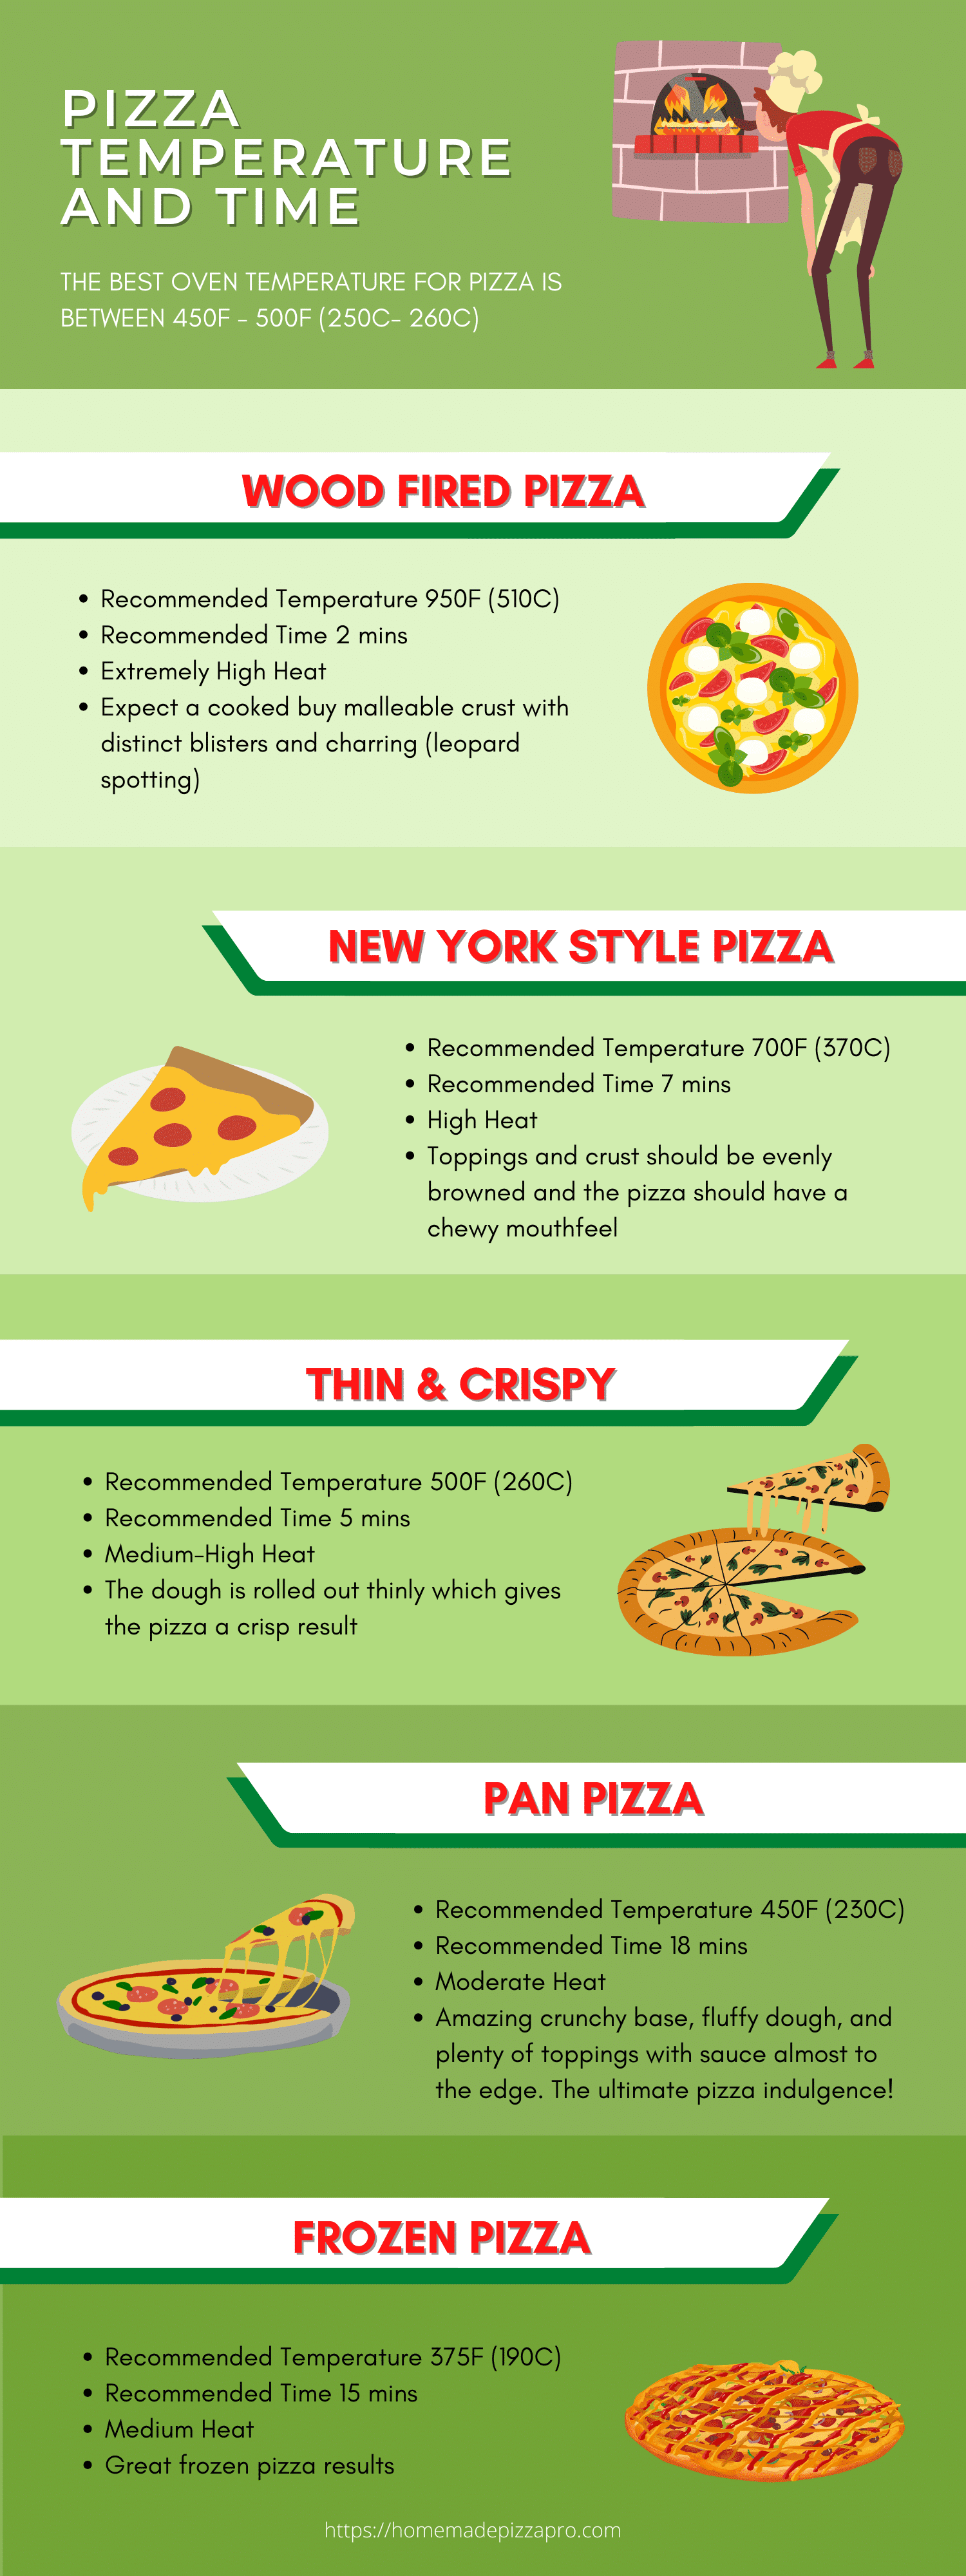 Pizza Temperature and Time Infographic